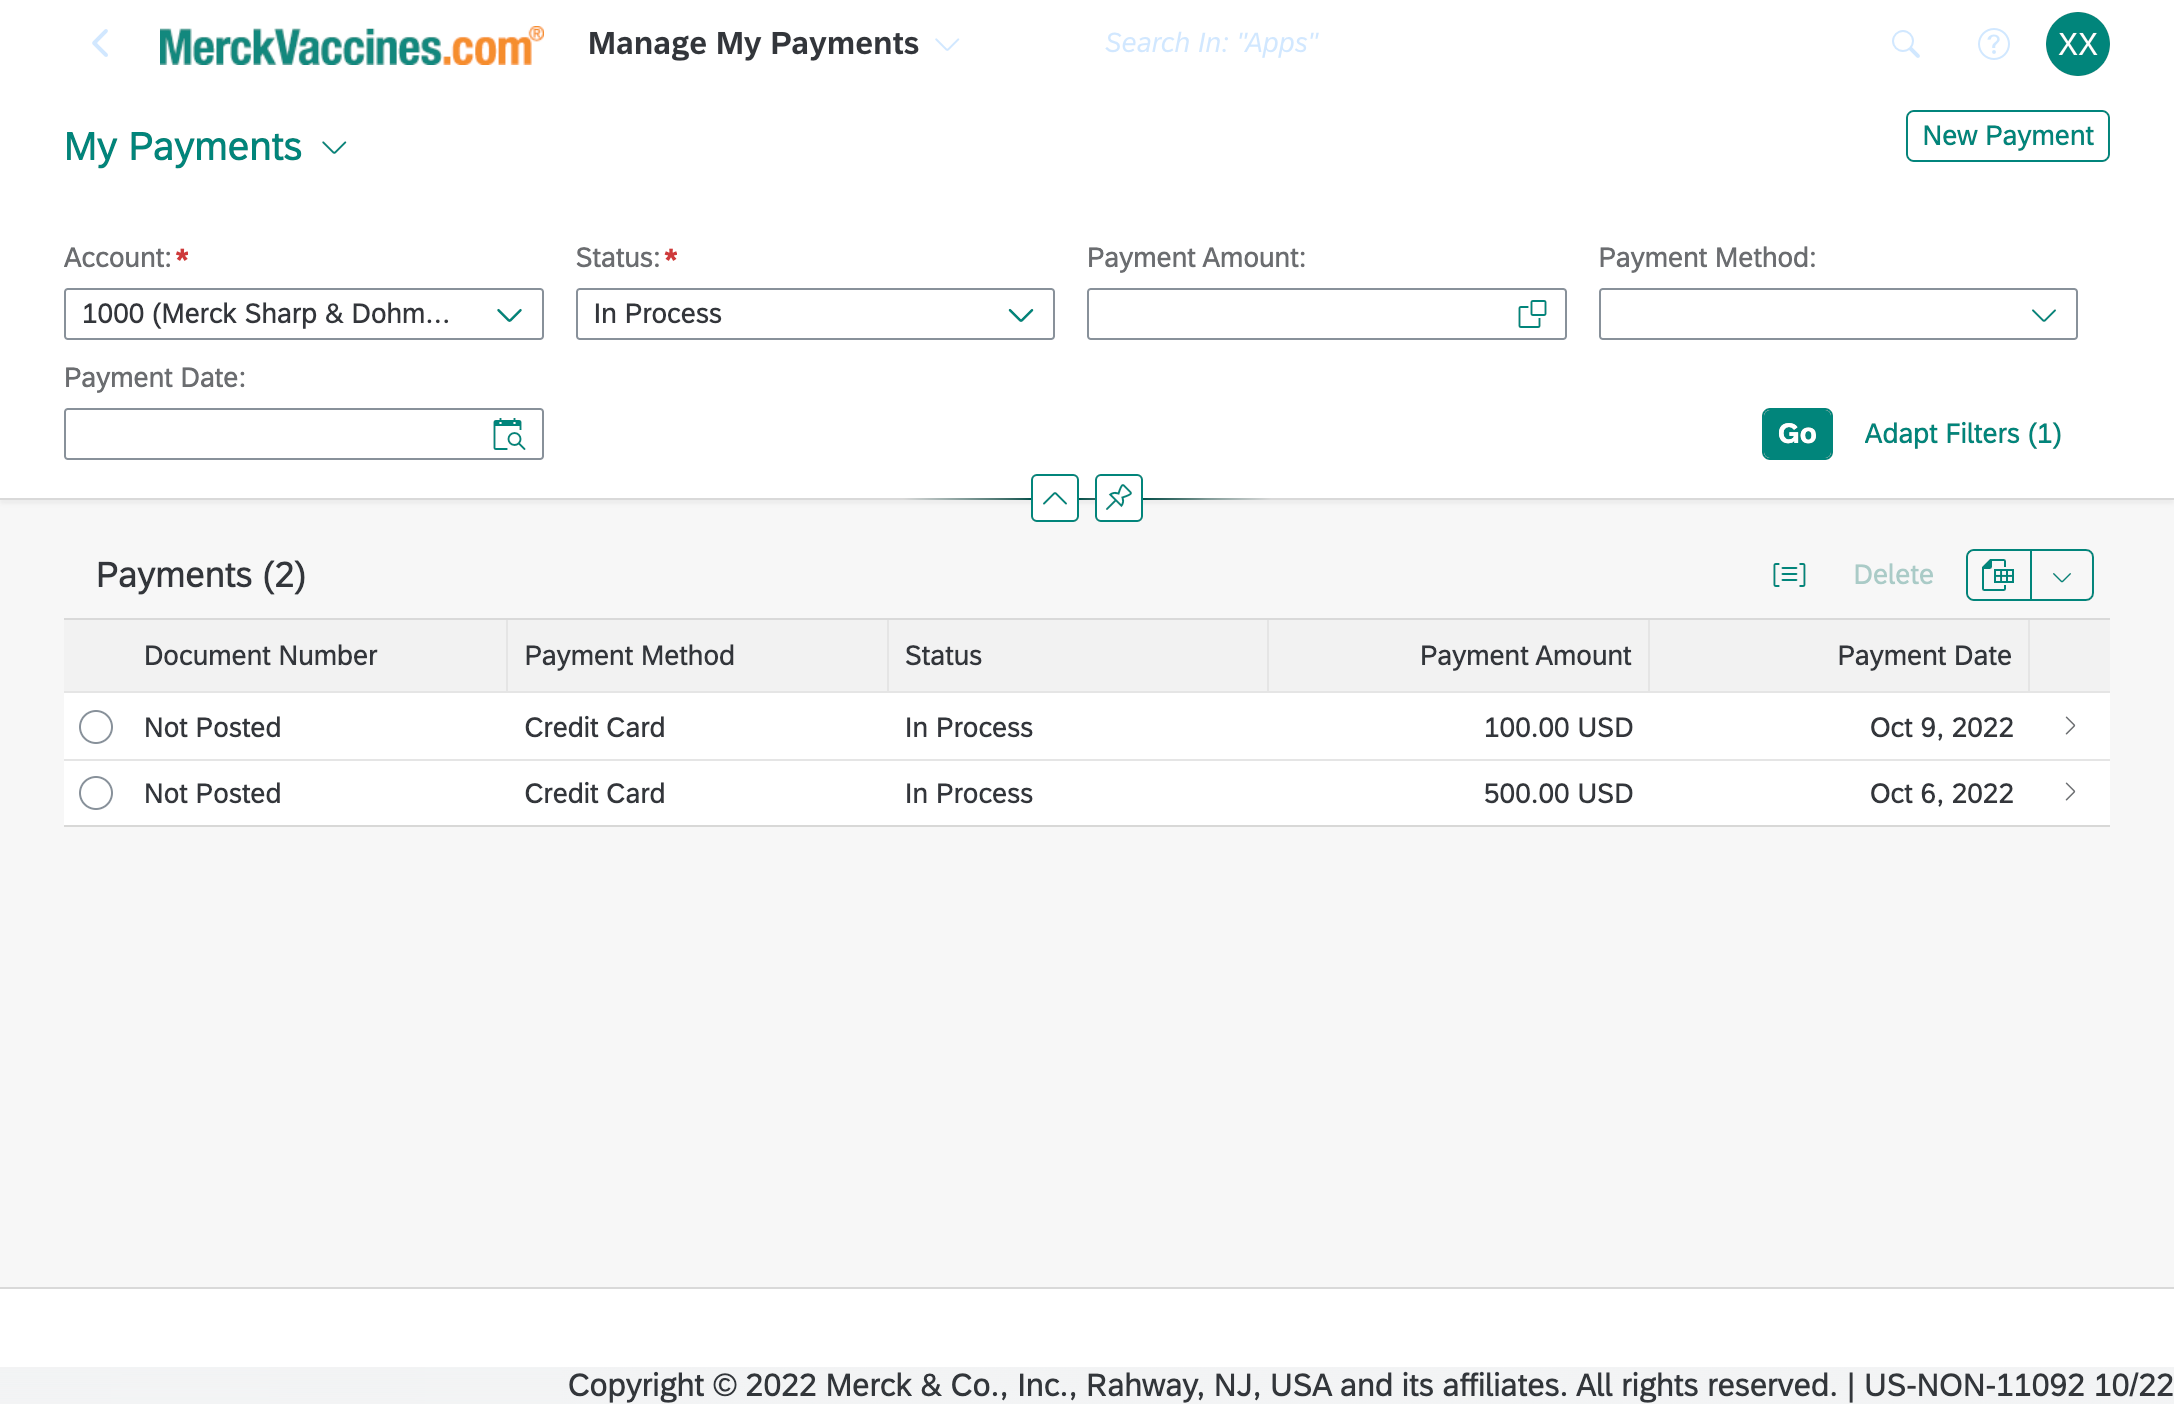 Example of Managing Payments in a Merck Account